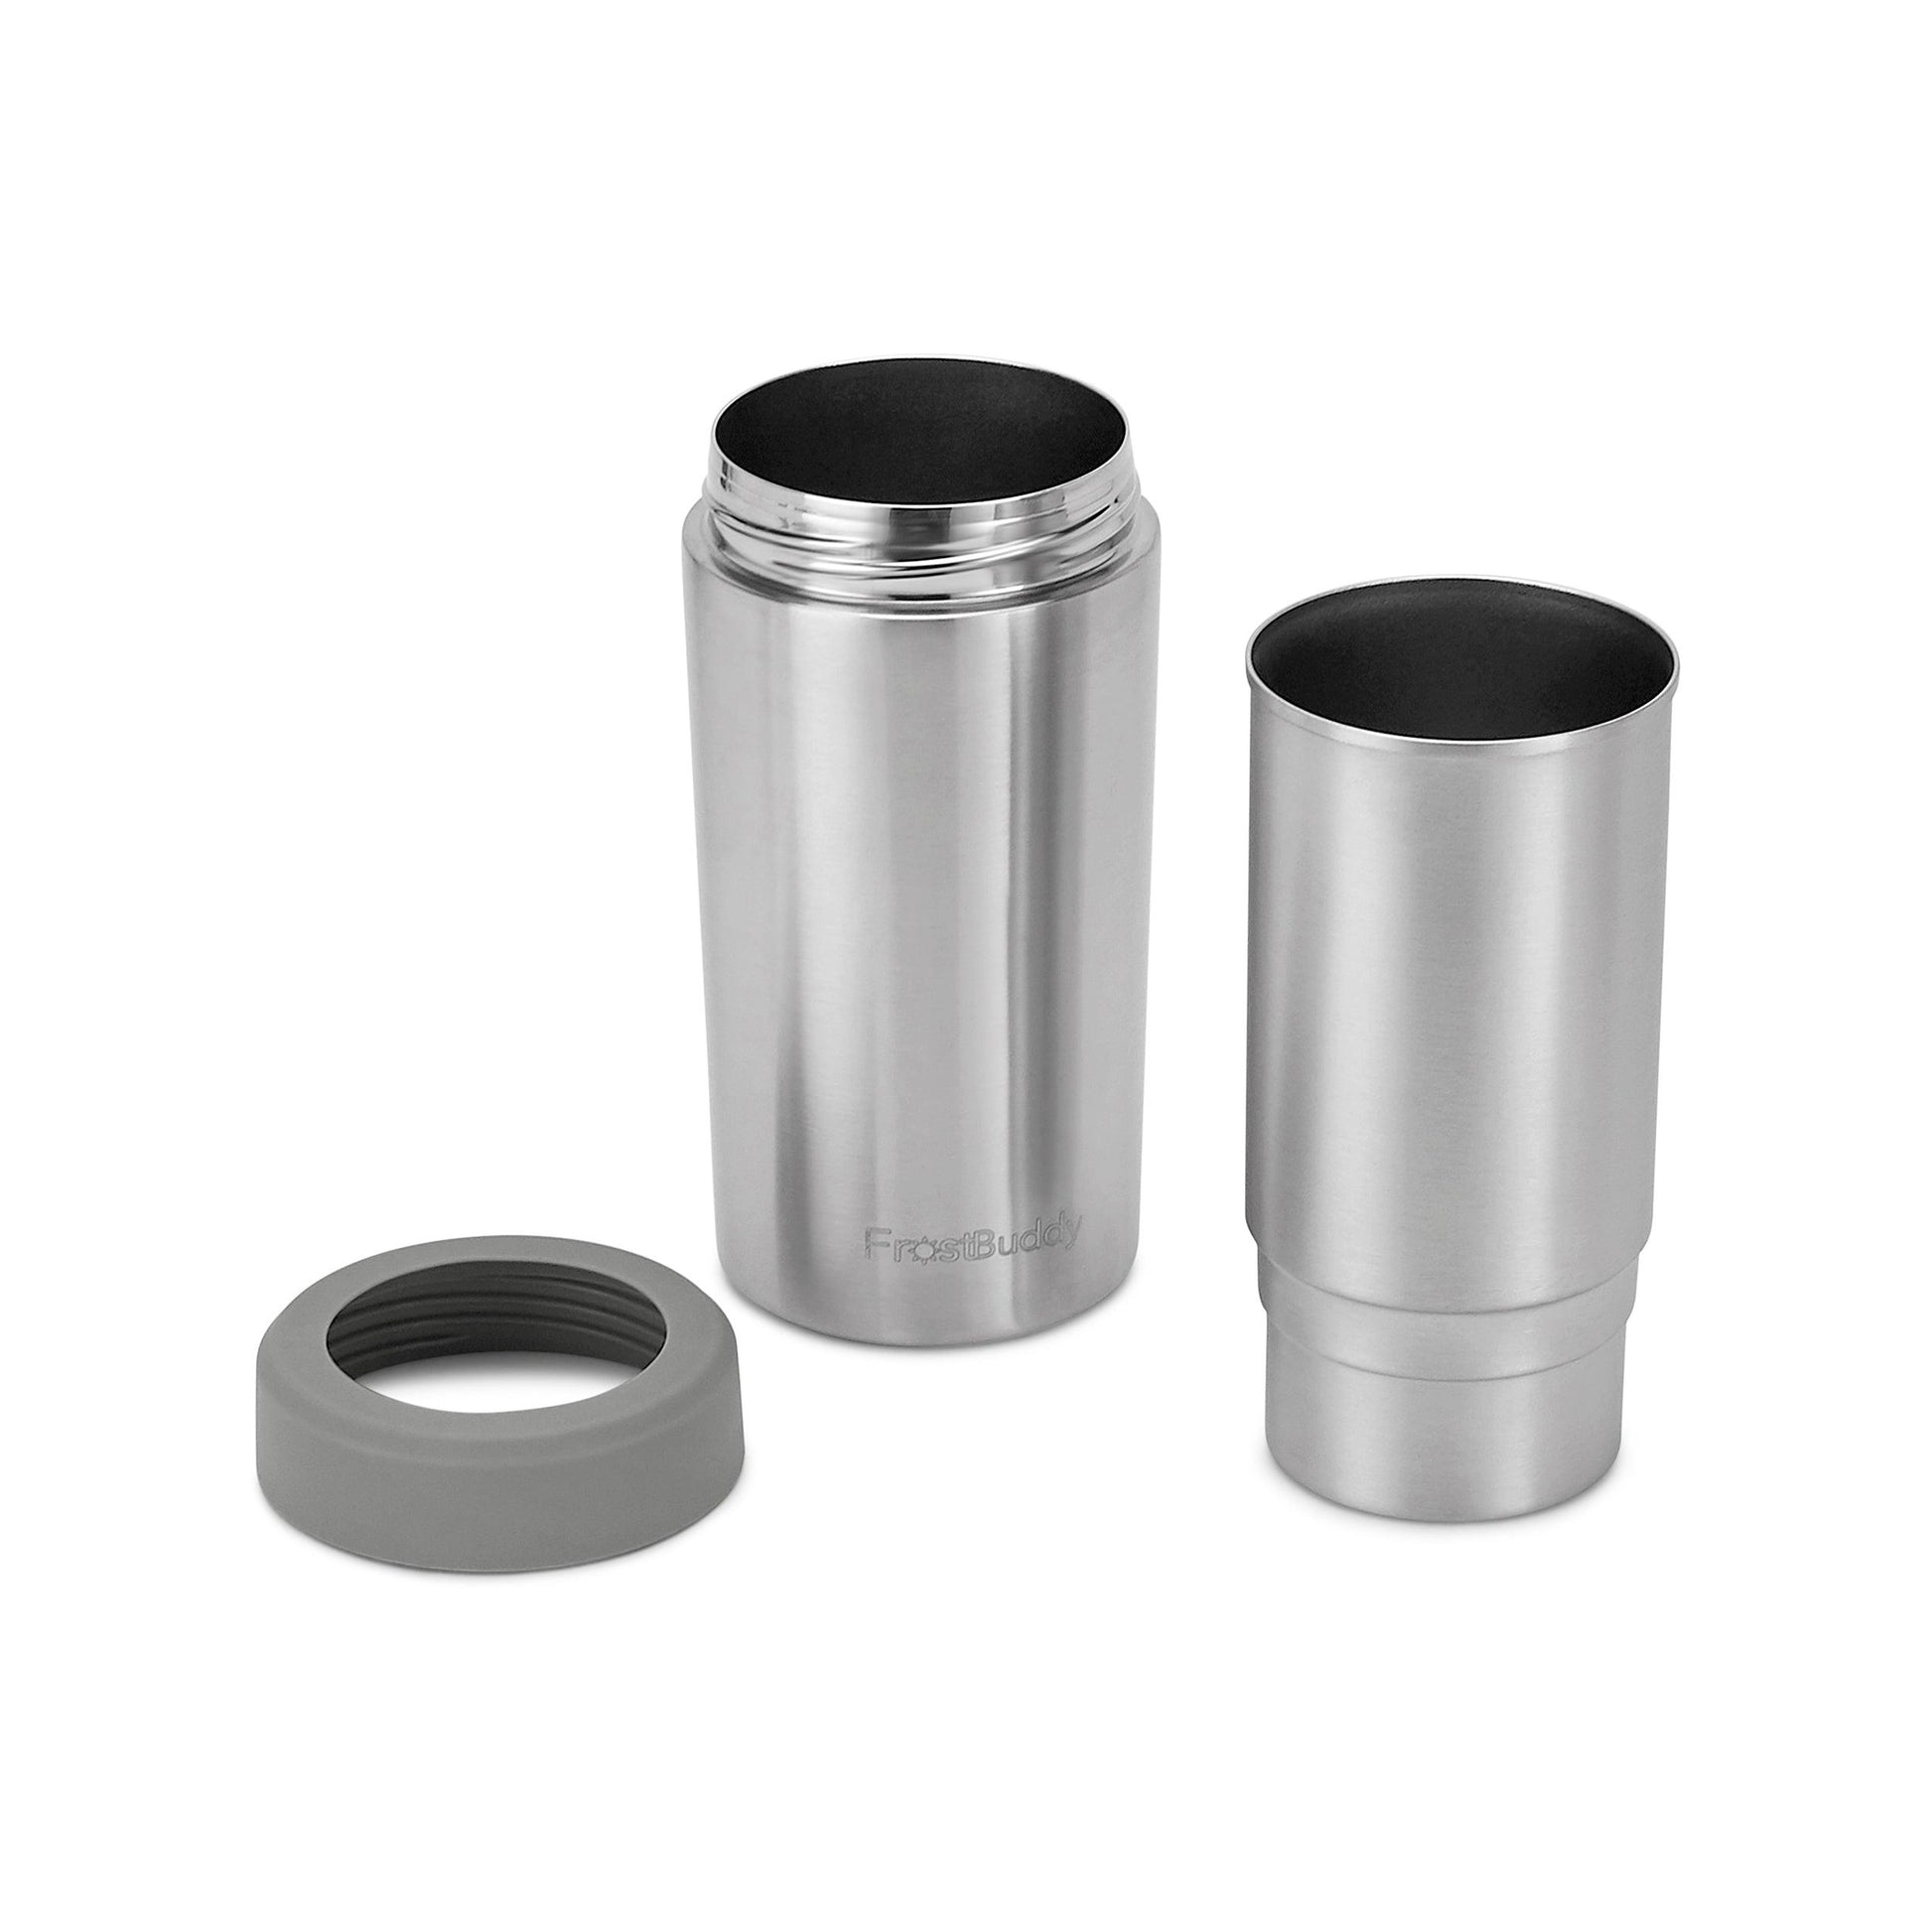 Frost Buddy​ Universal 2.0 Stainless Steel Insulated Can Cooler